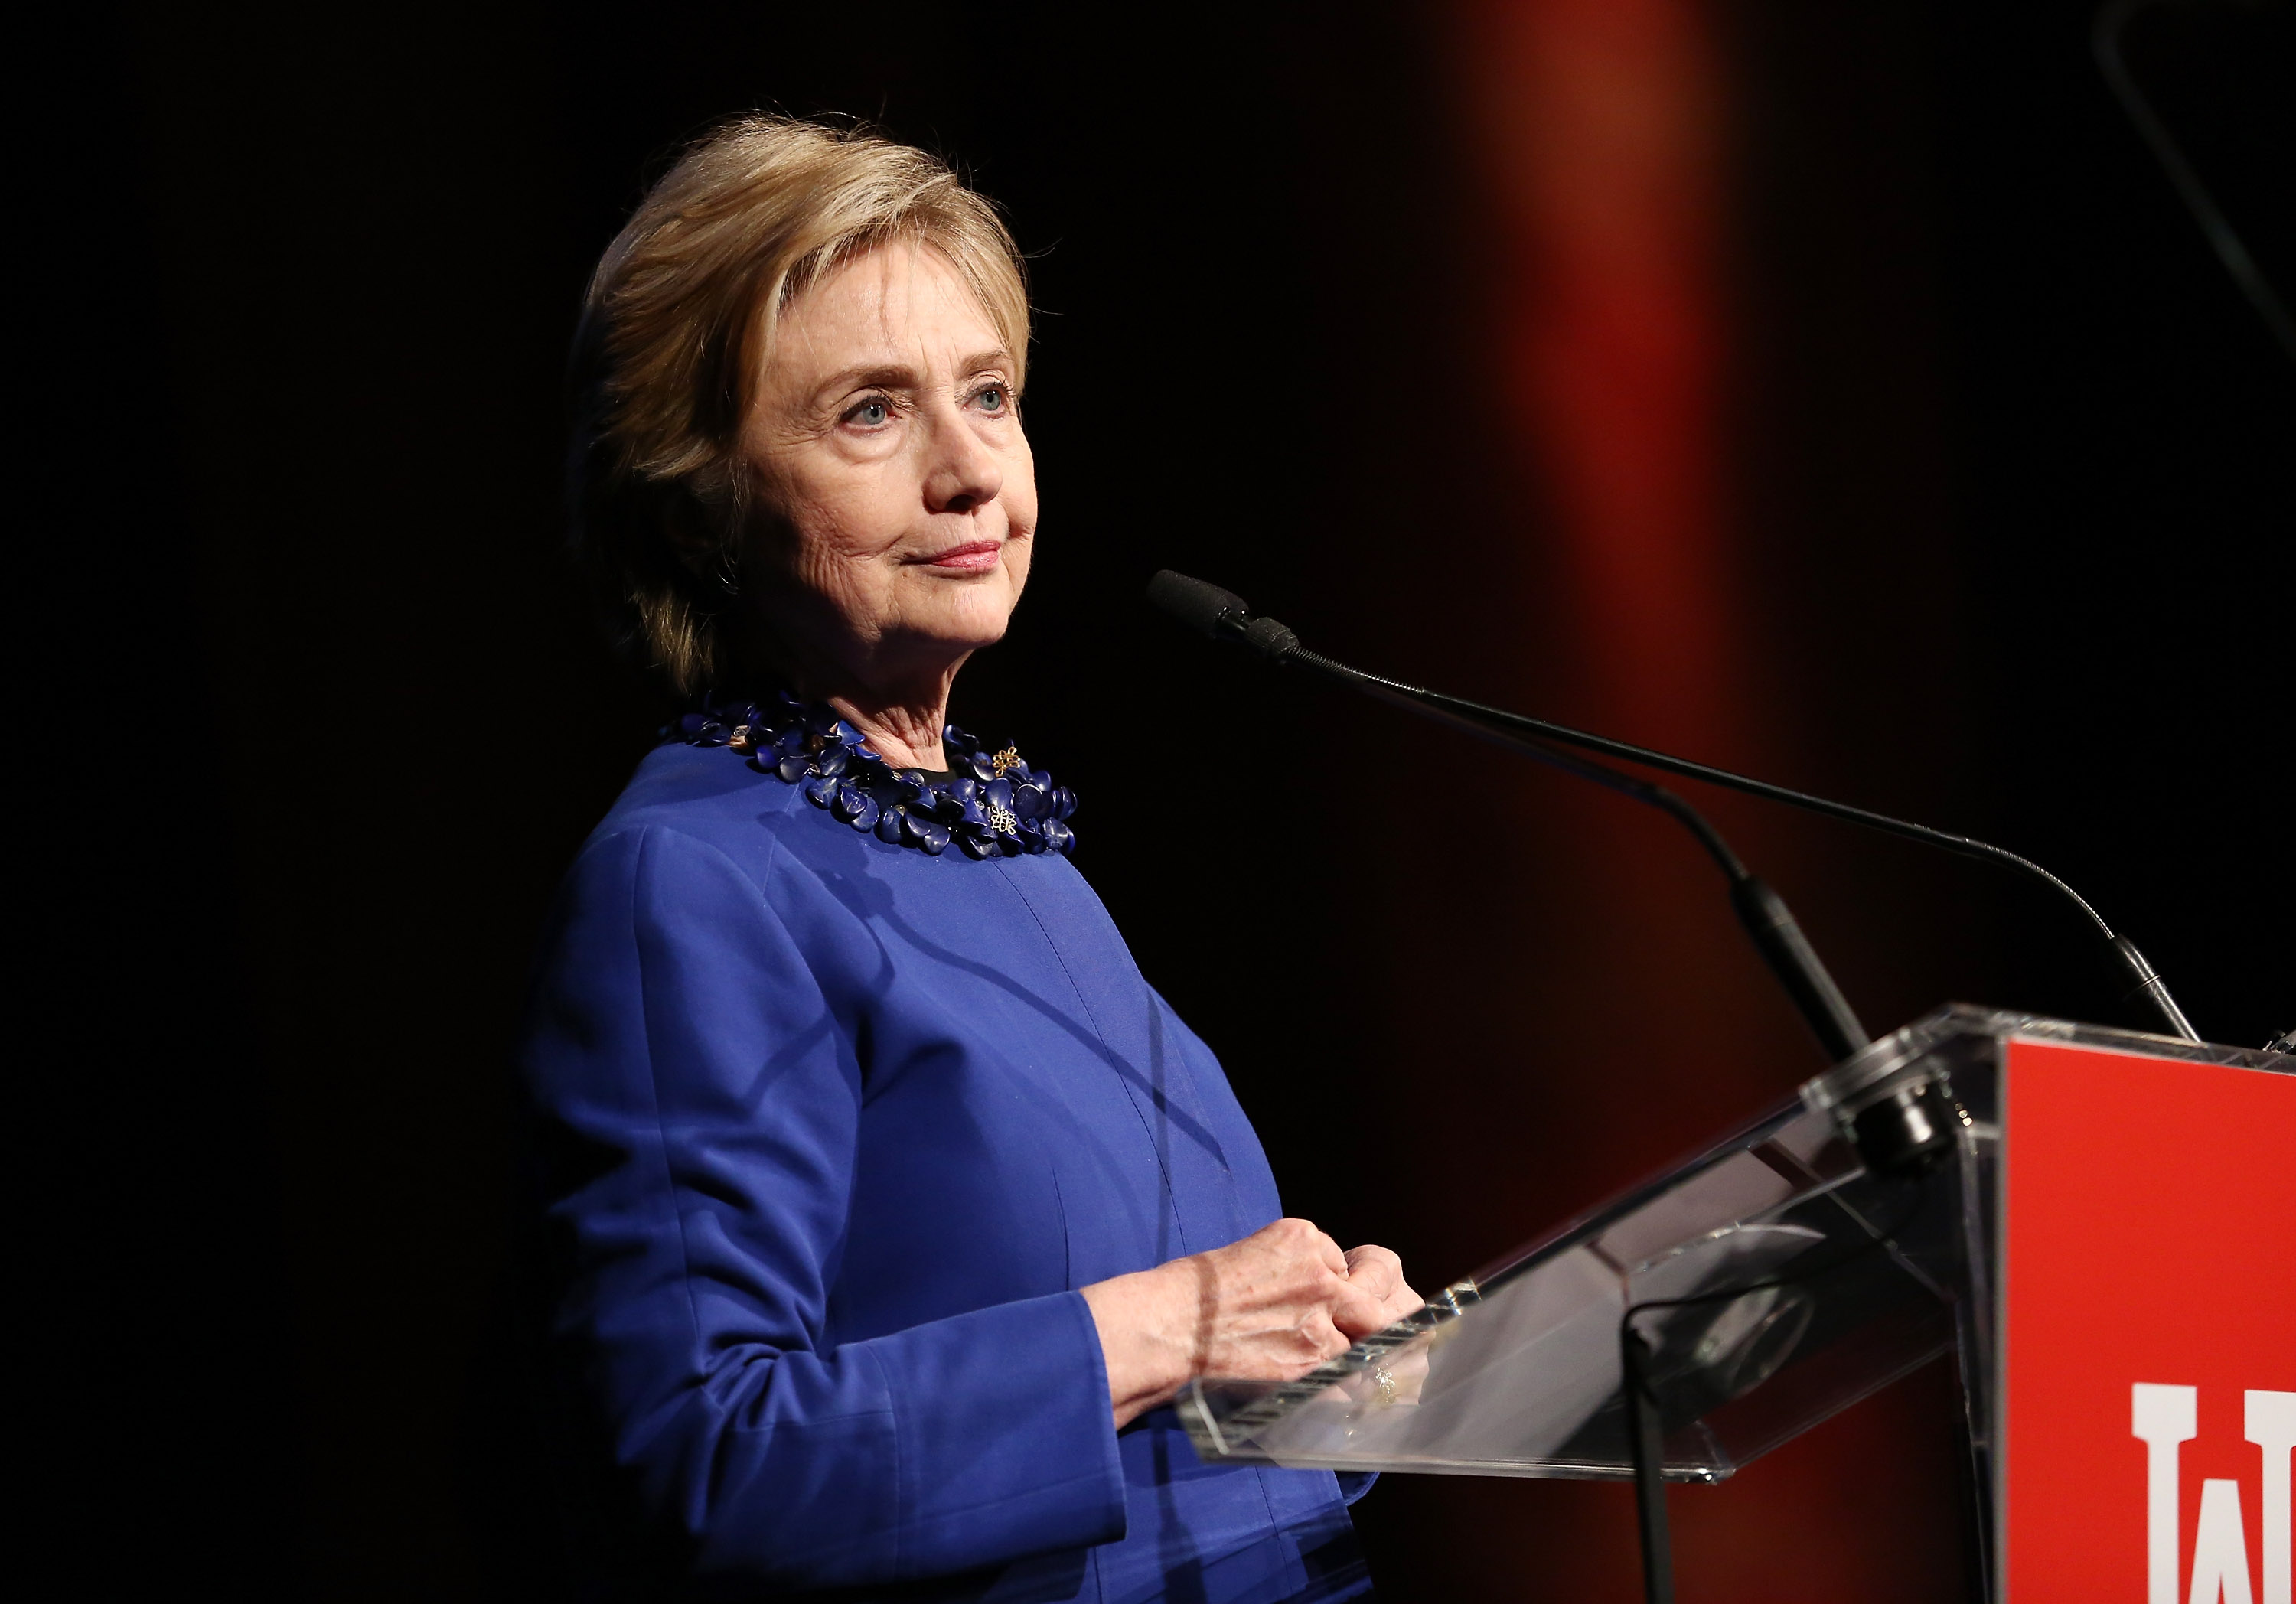 NEW YORK, NY - MAY 03:  Former US Secretary of State and WOV Honoree Hillary Clinton speaks onstage at the Ms. Foundation for Women 2017 Gloria Awards Gala &amp; After Party at Capitale on May 3, 2017 in New York City.  (Photo by Monica Schipper/Getty Images for The Foundation for Women) (Monica Schipper&mdash;Getty Images for The Foundation for Women)